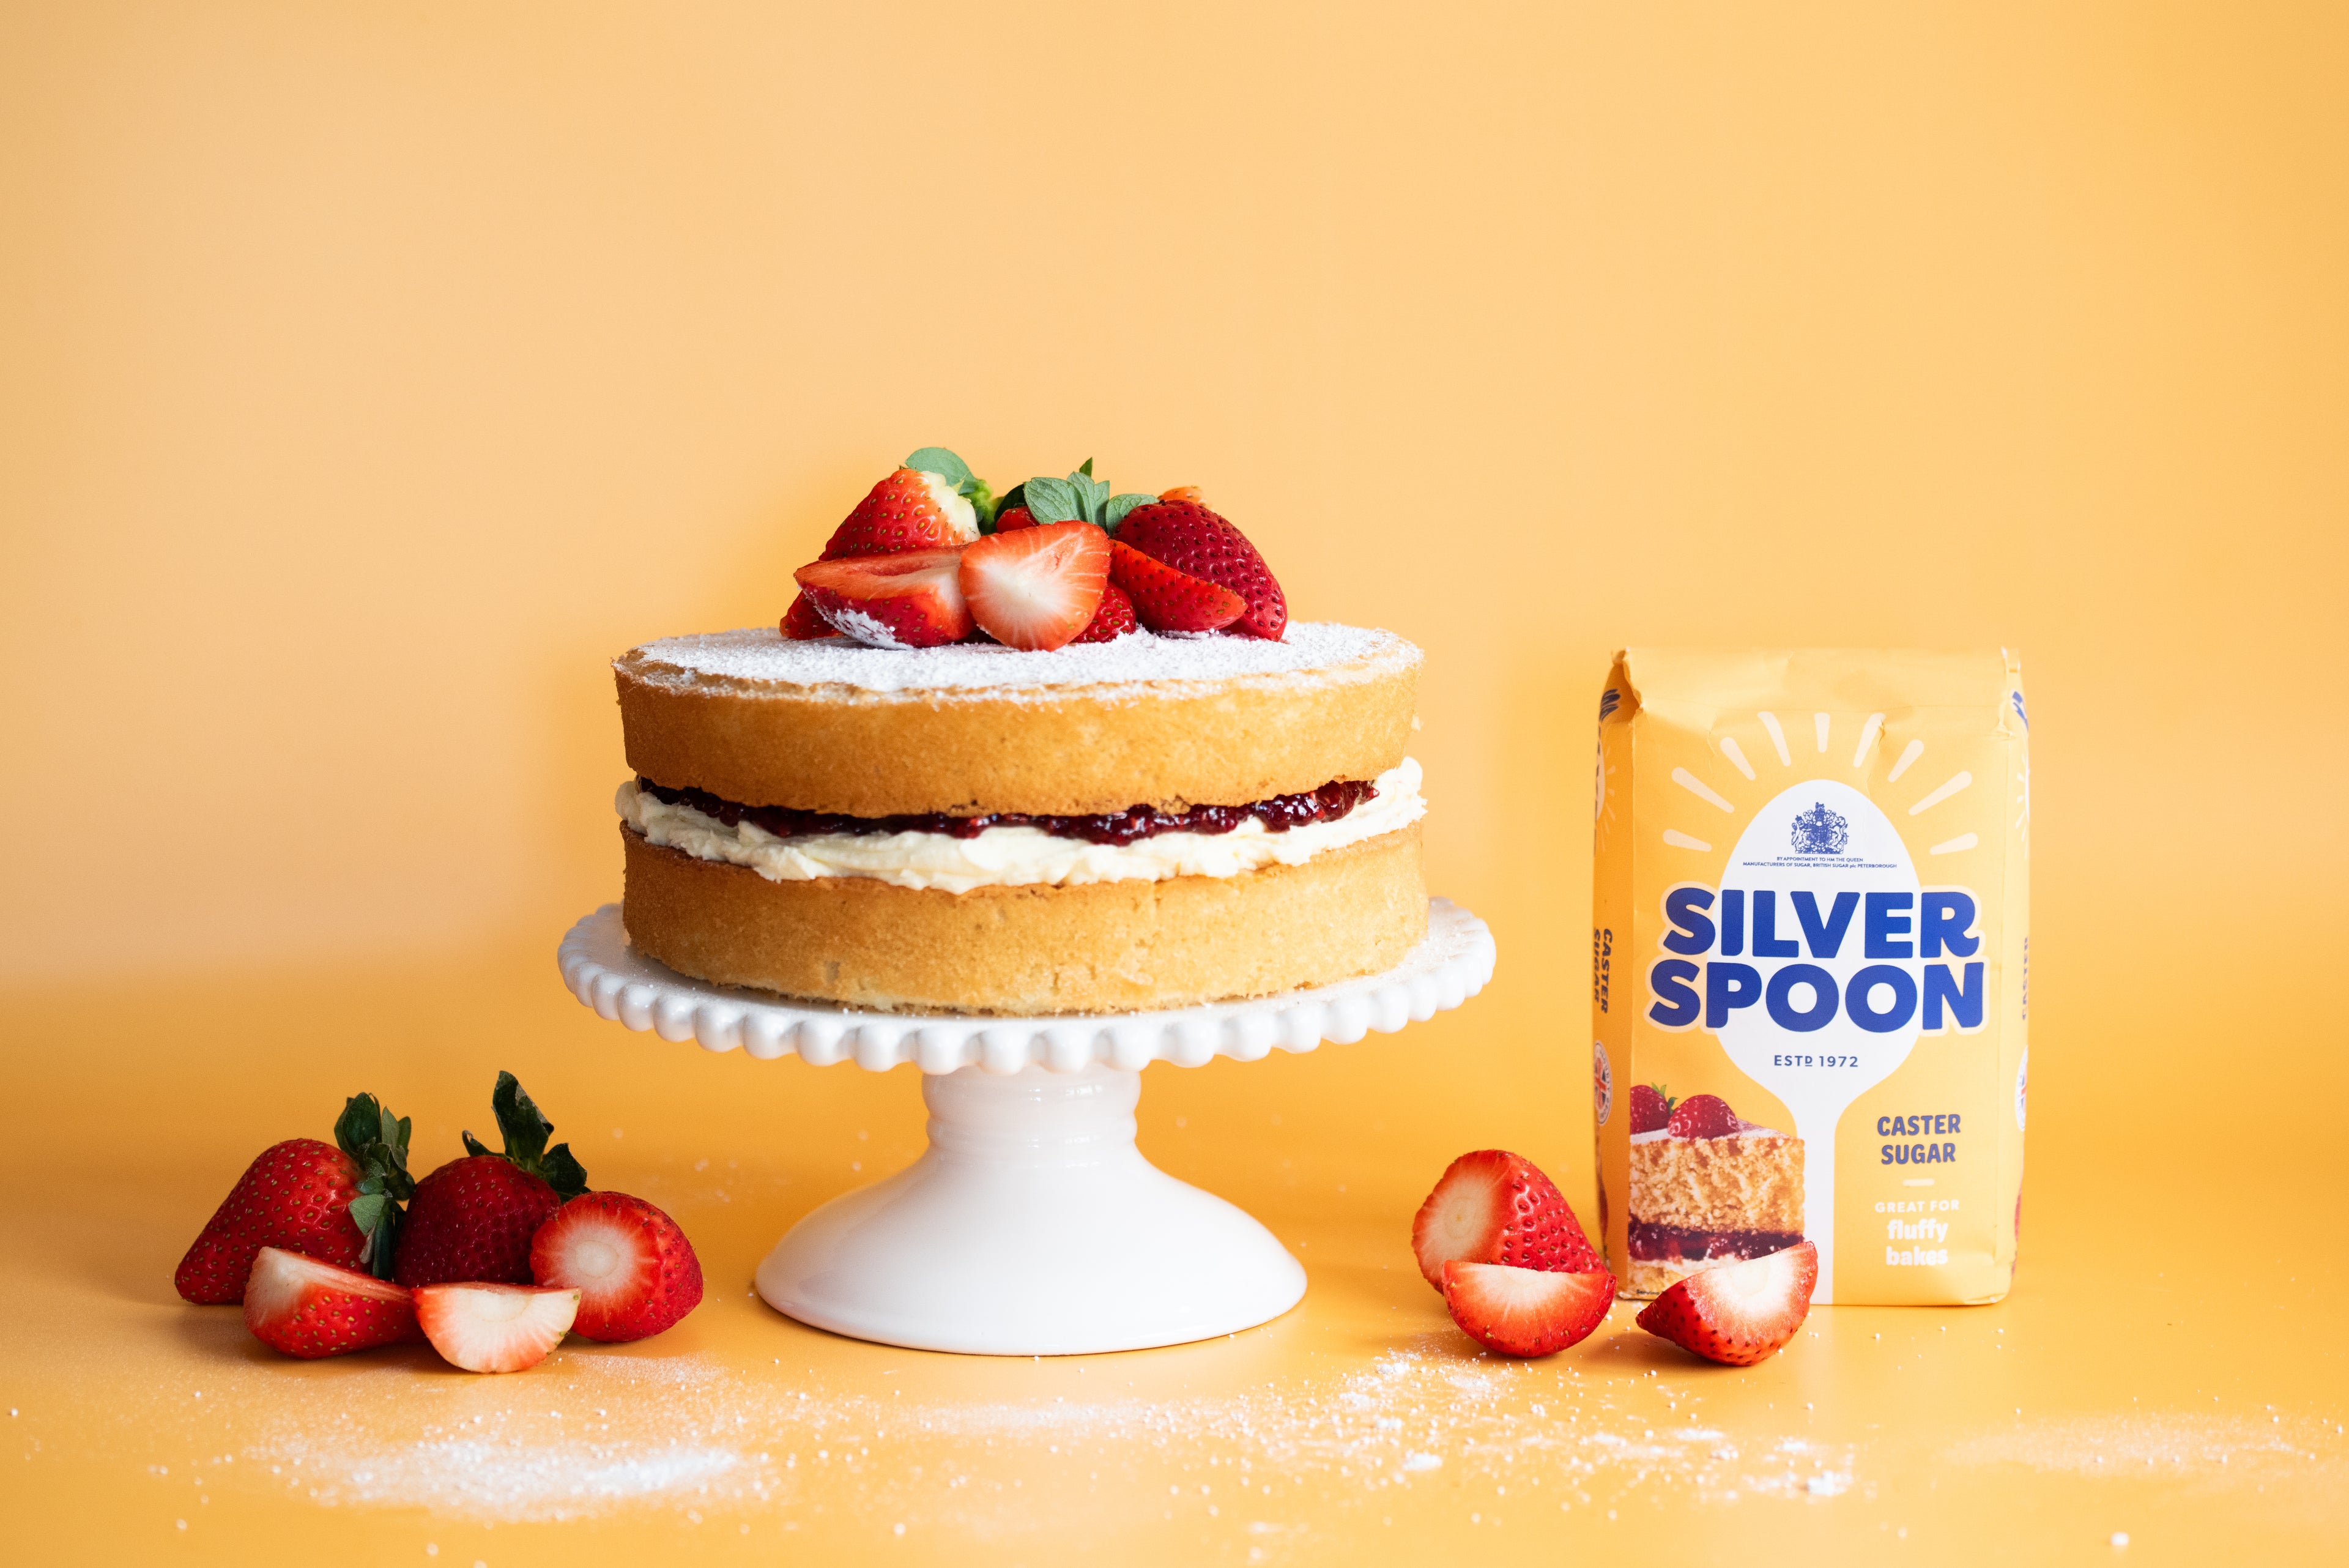 A victoria sponge cake topped with strawberries on a white cake stand beside strawberries and a pack of Silver Spoon sugar